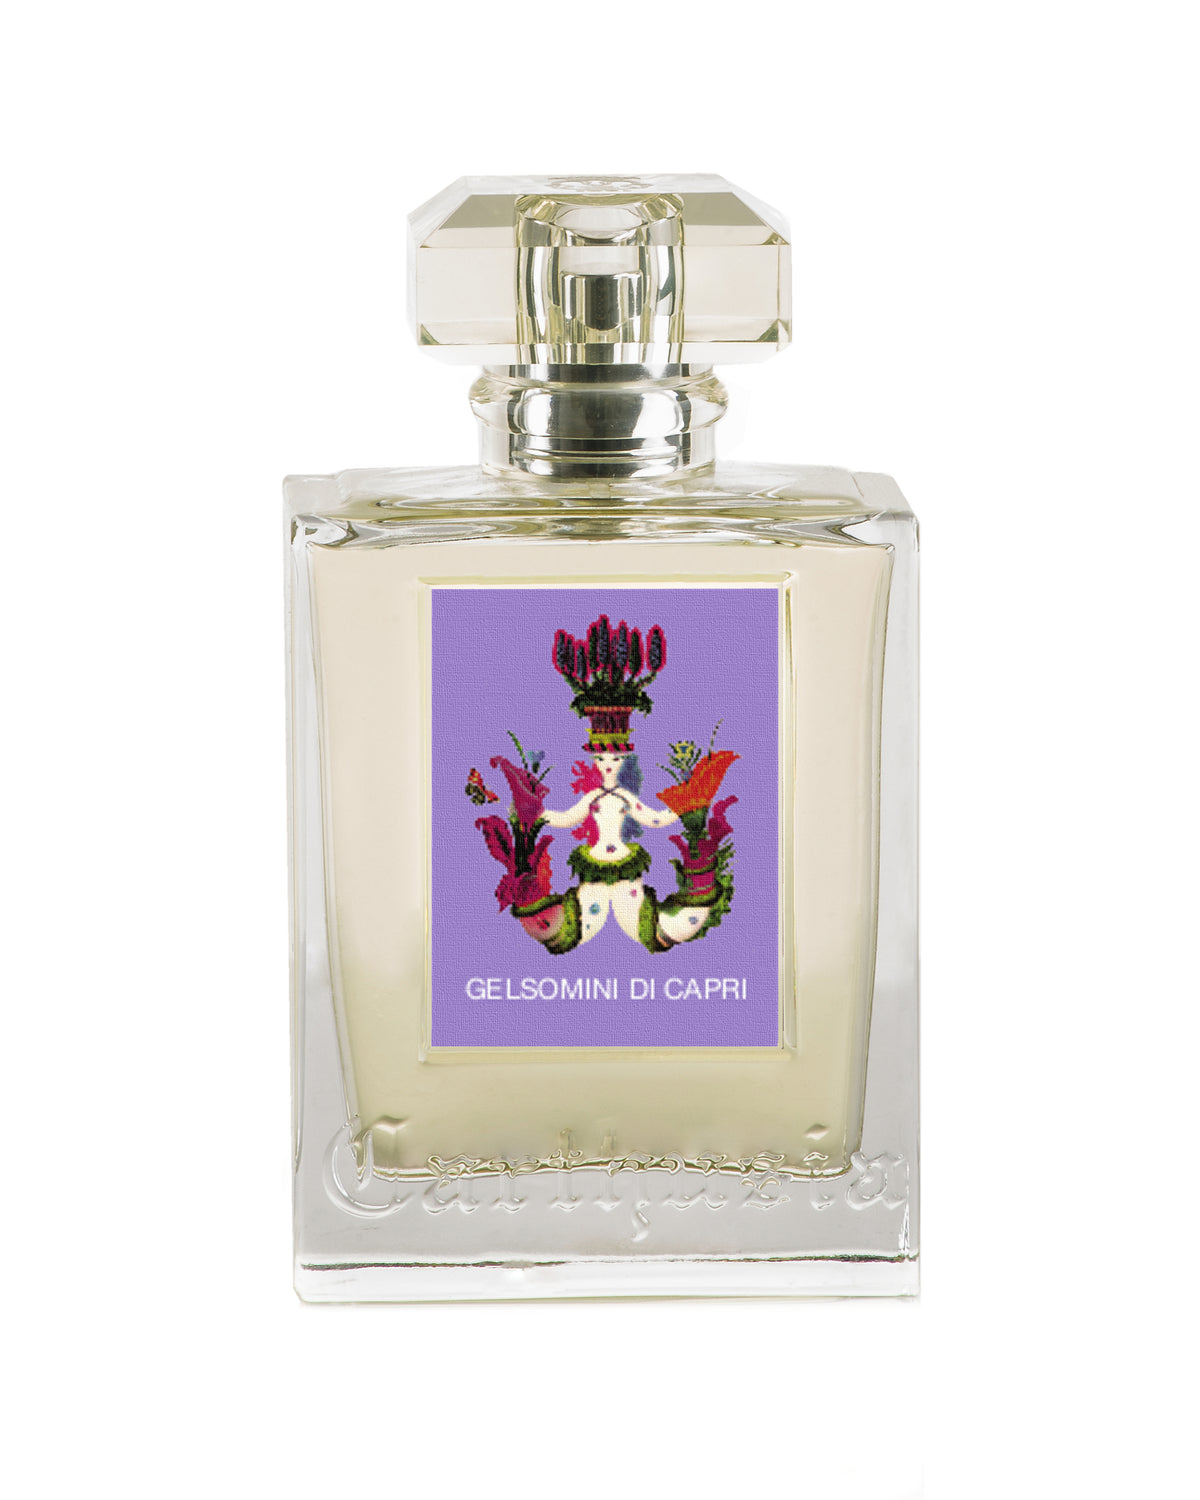 A clear glass perfume bottle with a square design and a faceted cap. The label features a vibrant, abstract floral illustration and the text "Carthusia Gelsomini di Capri", highlighting notes of jasmine.